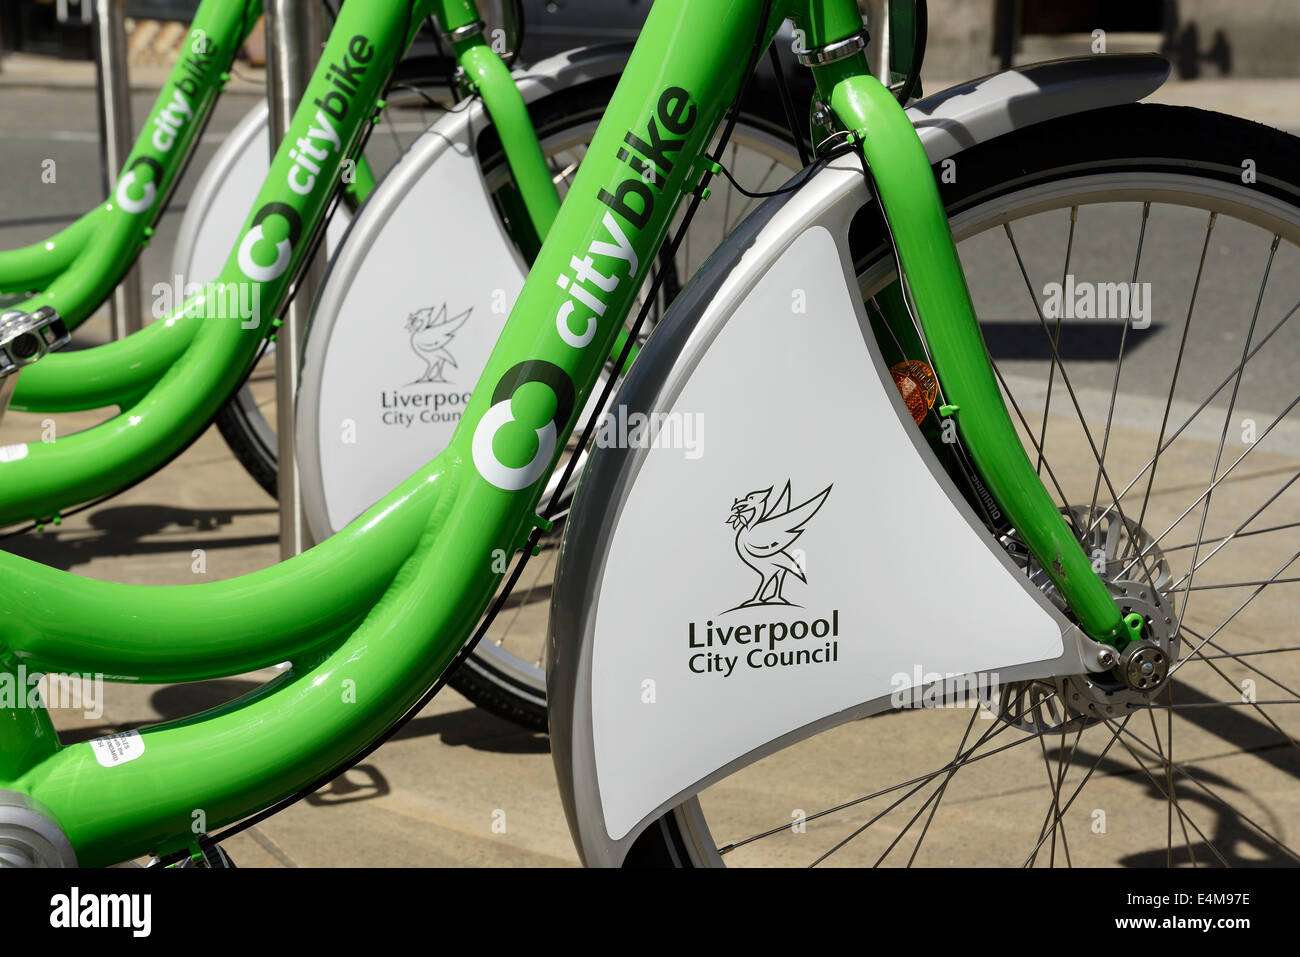 Green bicycles from the Liverpool CIty Council City Bike scheme Stock Photo